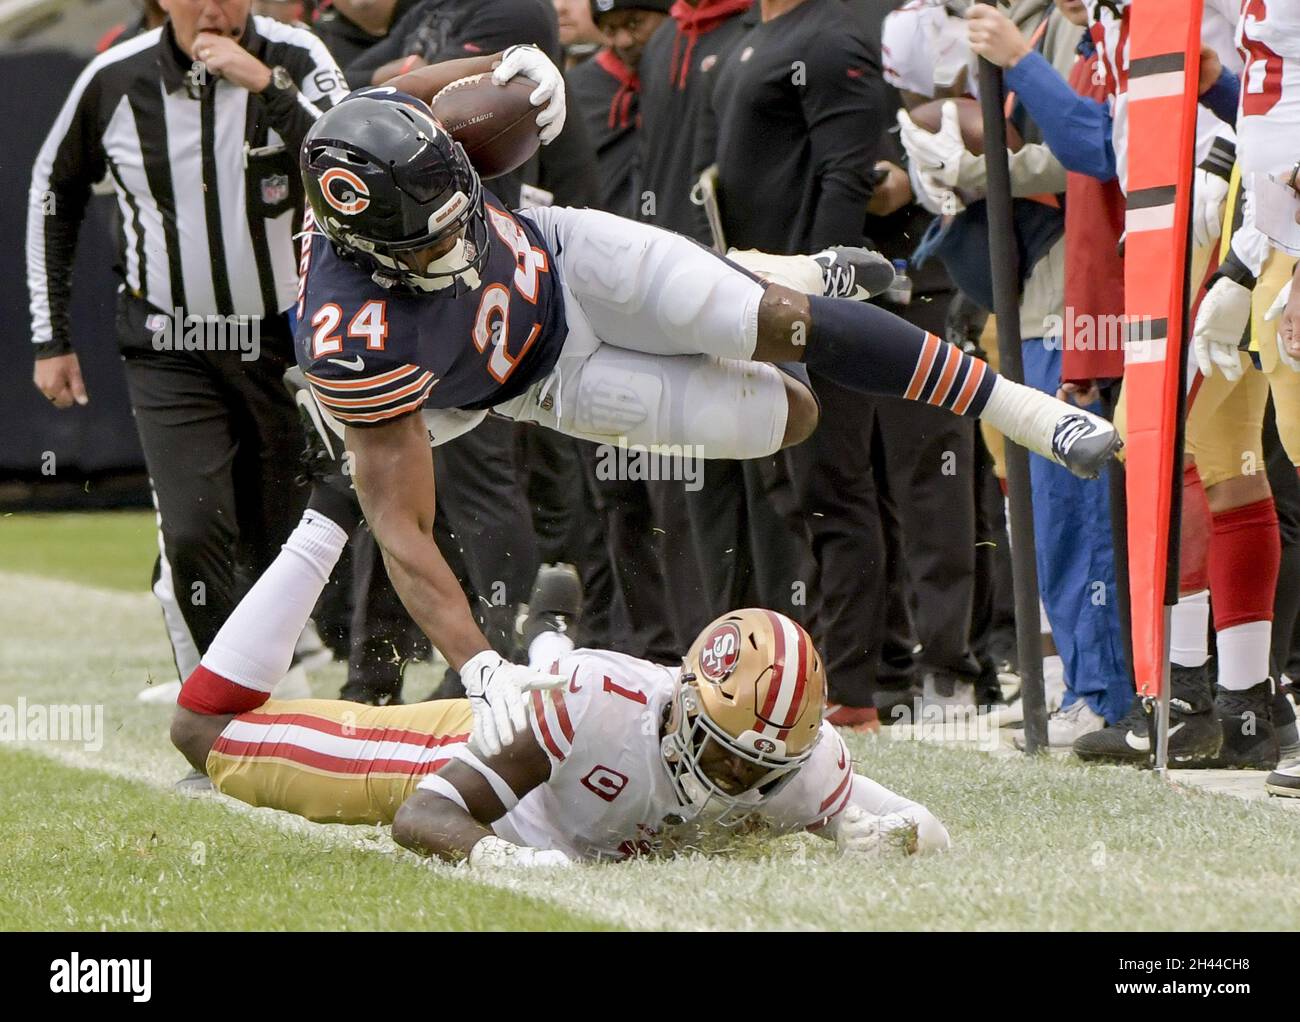 Chicago, United States. 31st Oct, 2021. Chicago Bears running back Khalil  Herbert (24) is knocked out of bounds by San Francisco 49ers free safety  Jimmie Ward (1) during the second quarter at